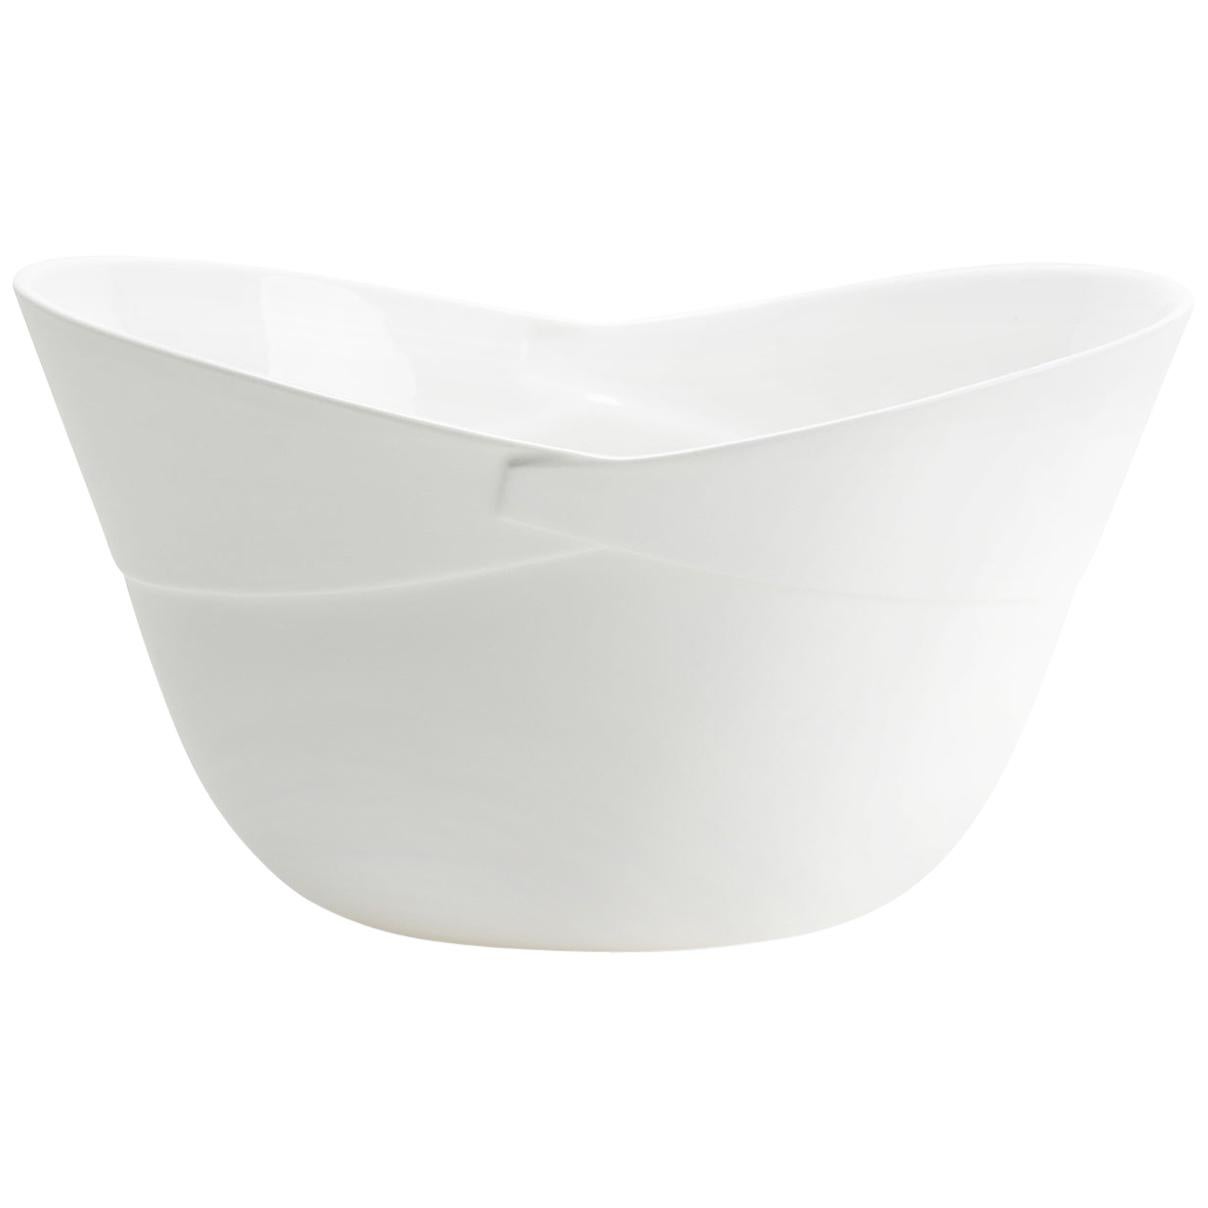 Fine Bone China Large Deep Bowl Sculpted with Generous and Curvaceous Forms